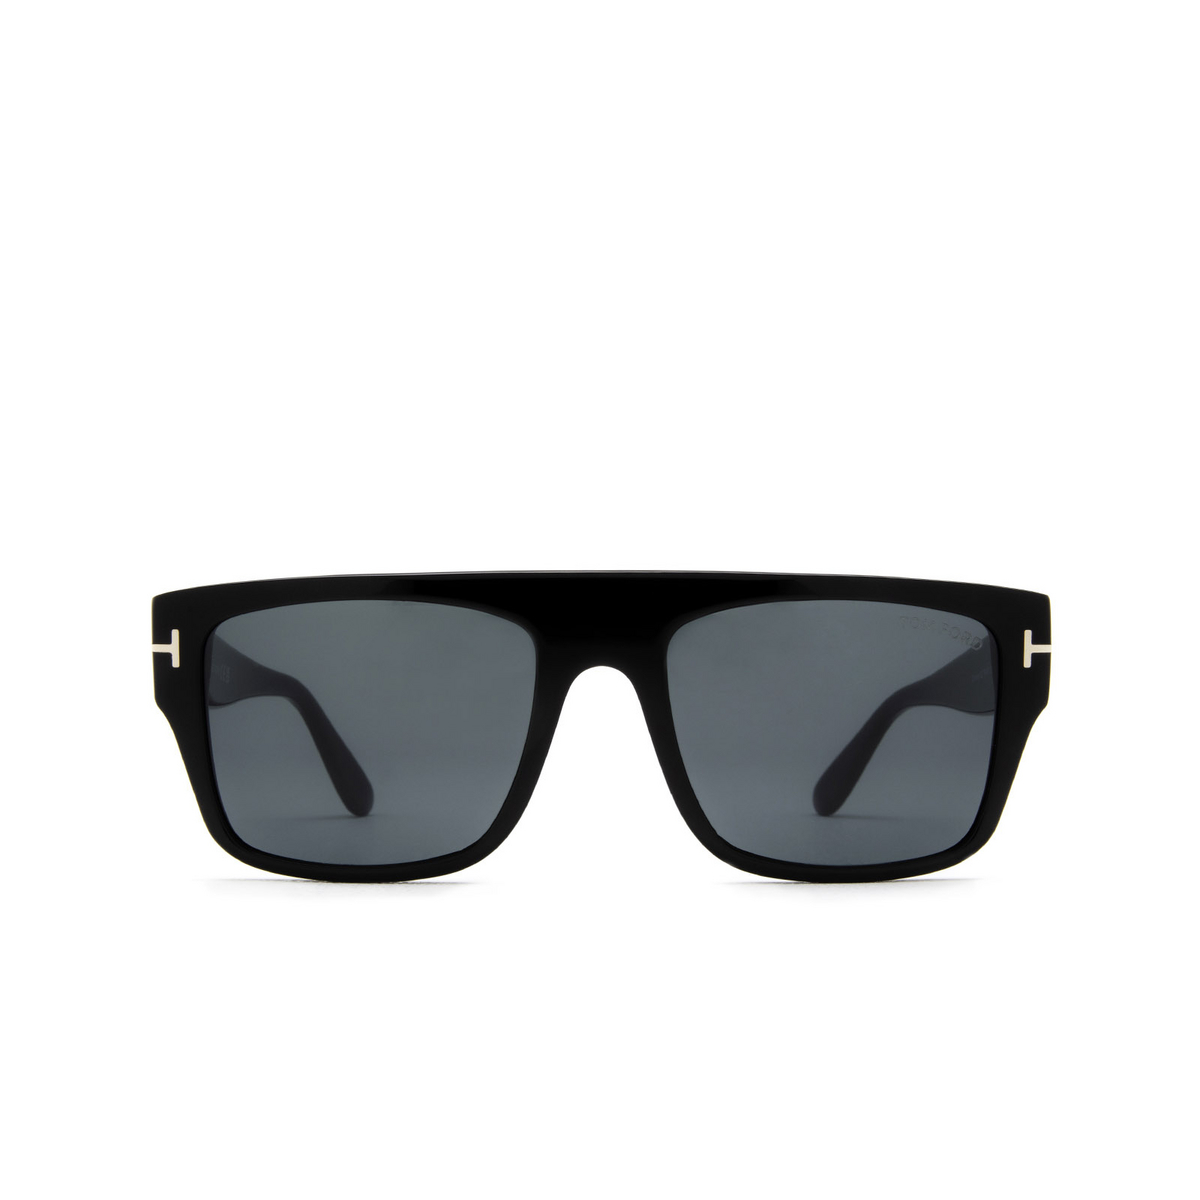 Tom Ford DUNNING-02 Sunglasses 01V Black - front view